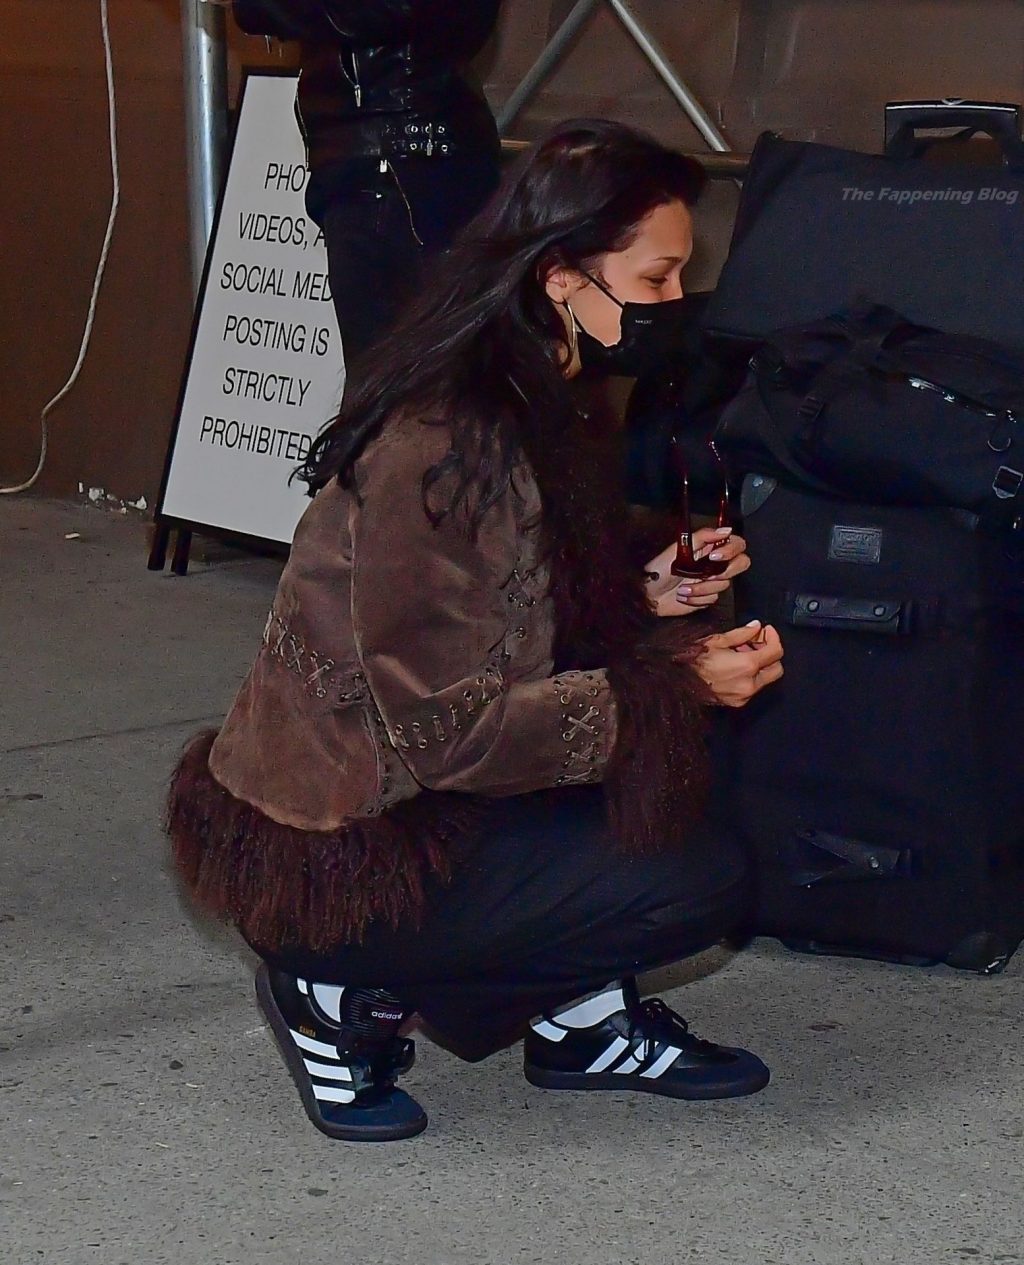 Bella Hadid Makes Friends with NYPD Puppy While Waiting For Rapid COVID Test Result in NYC (61 Photos)